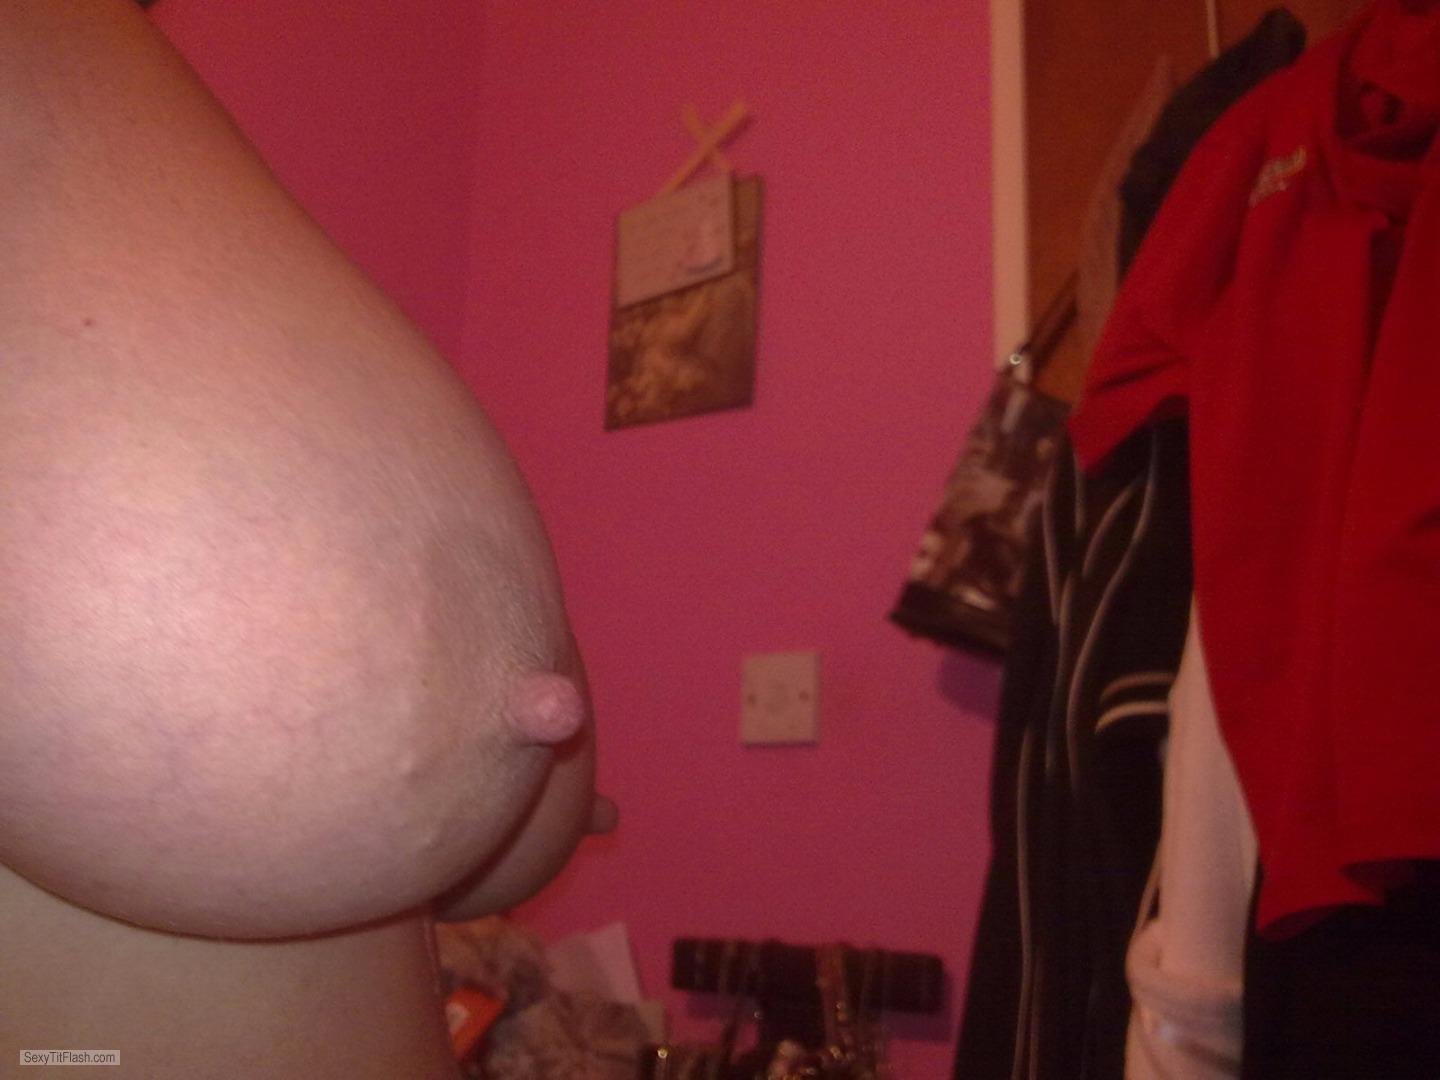 Tit Flash: My Very Small Tits - Topless Louise from United Kingdom